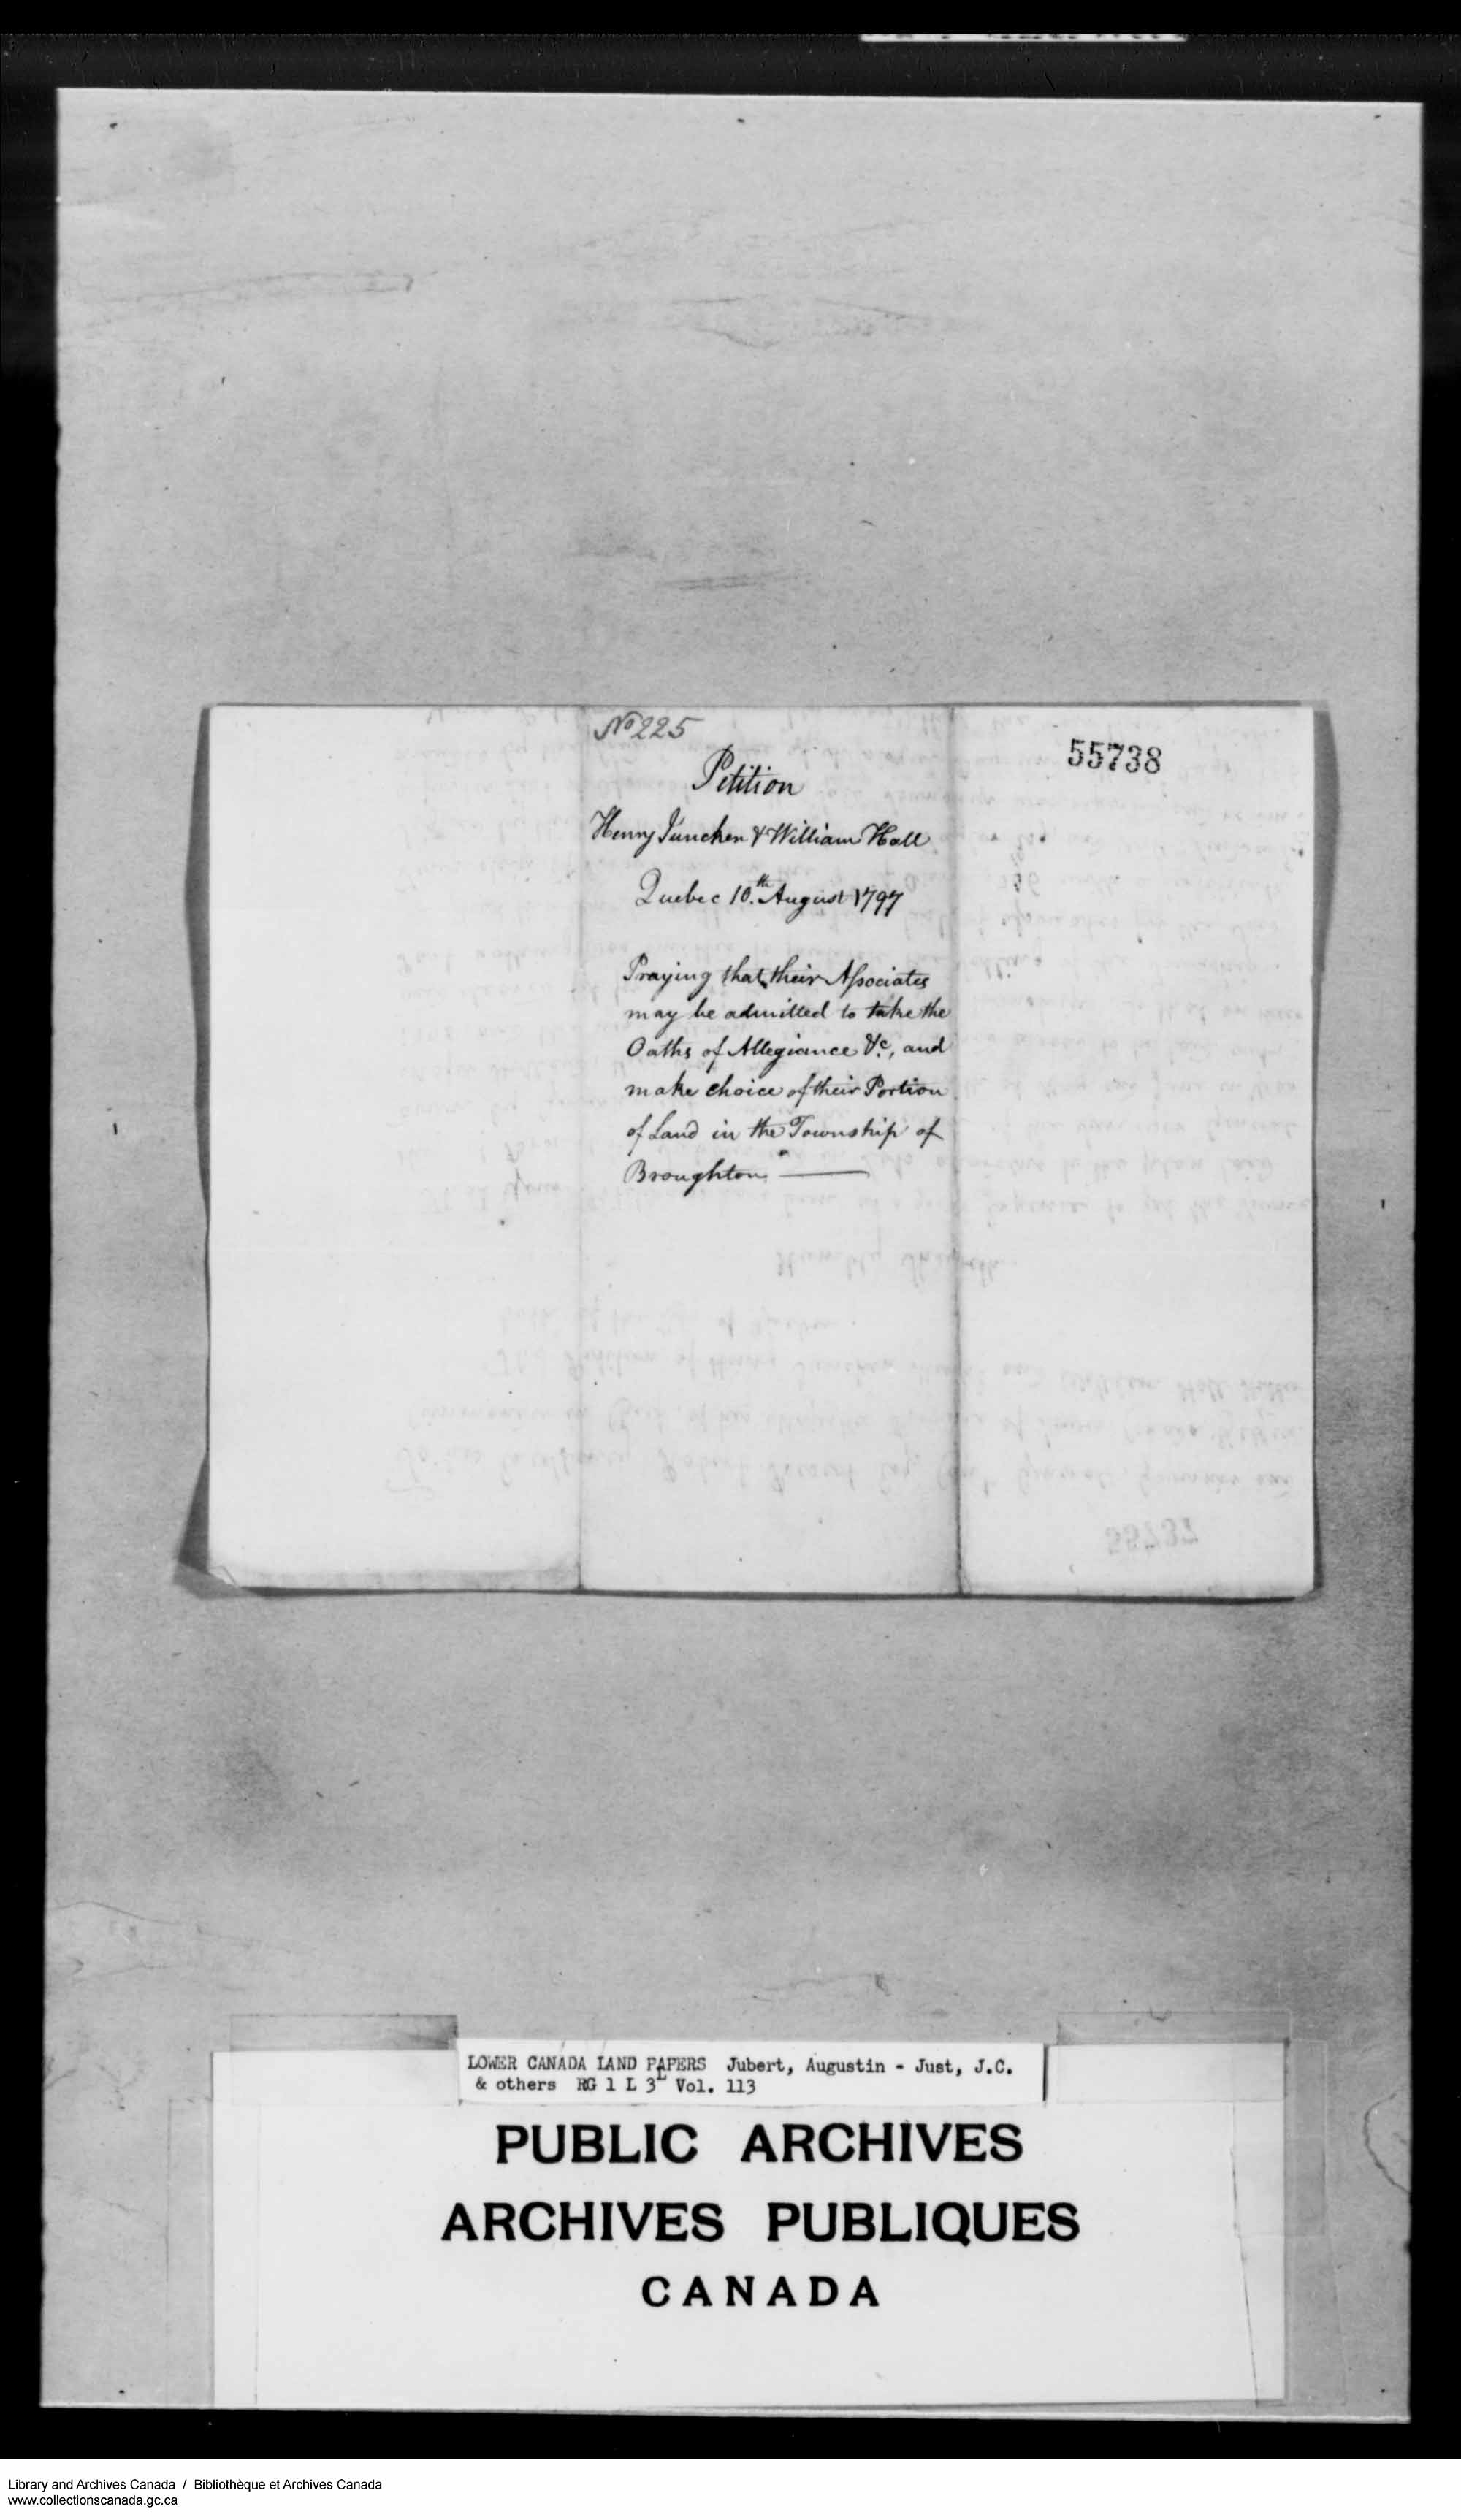 Digitized page of  for Image No.: e008700226